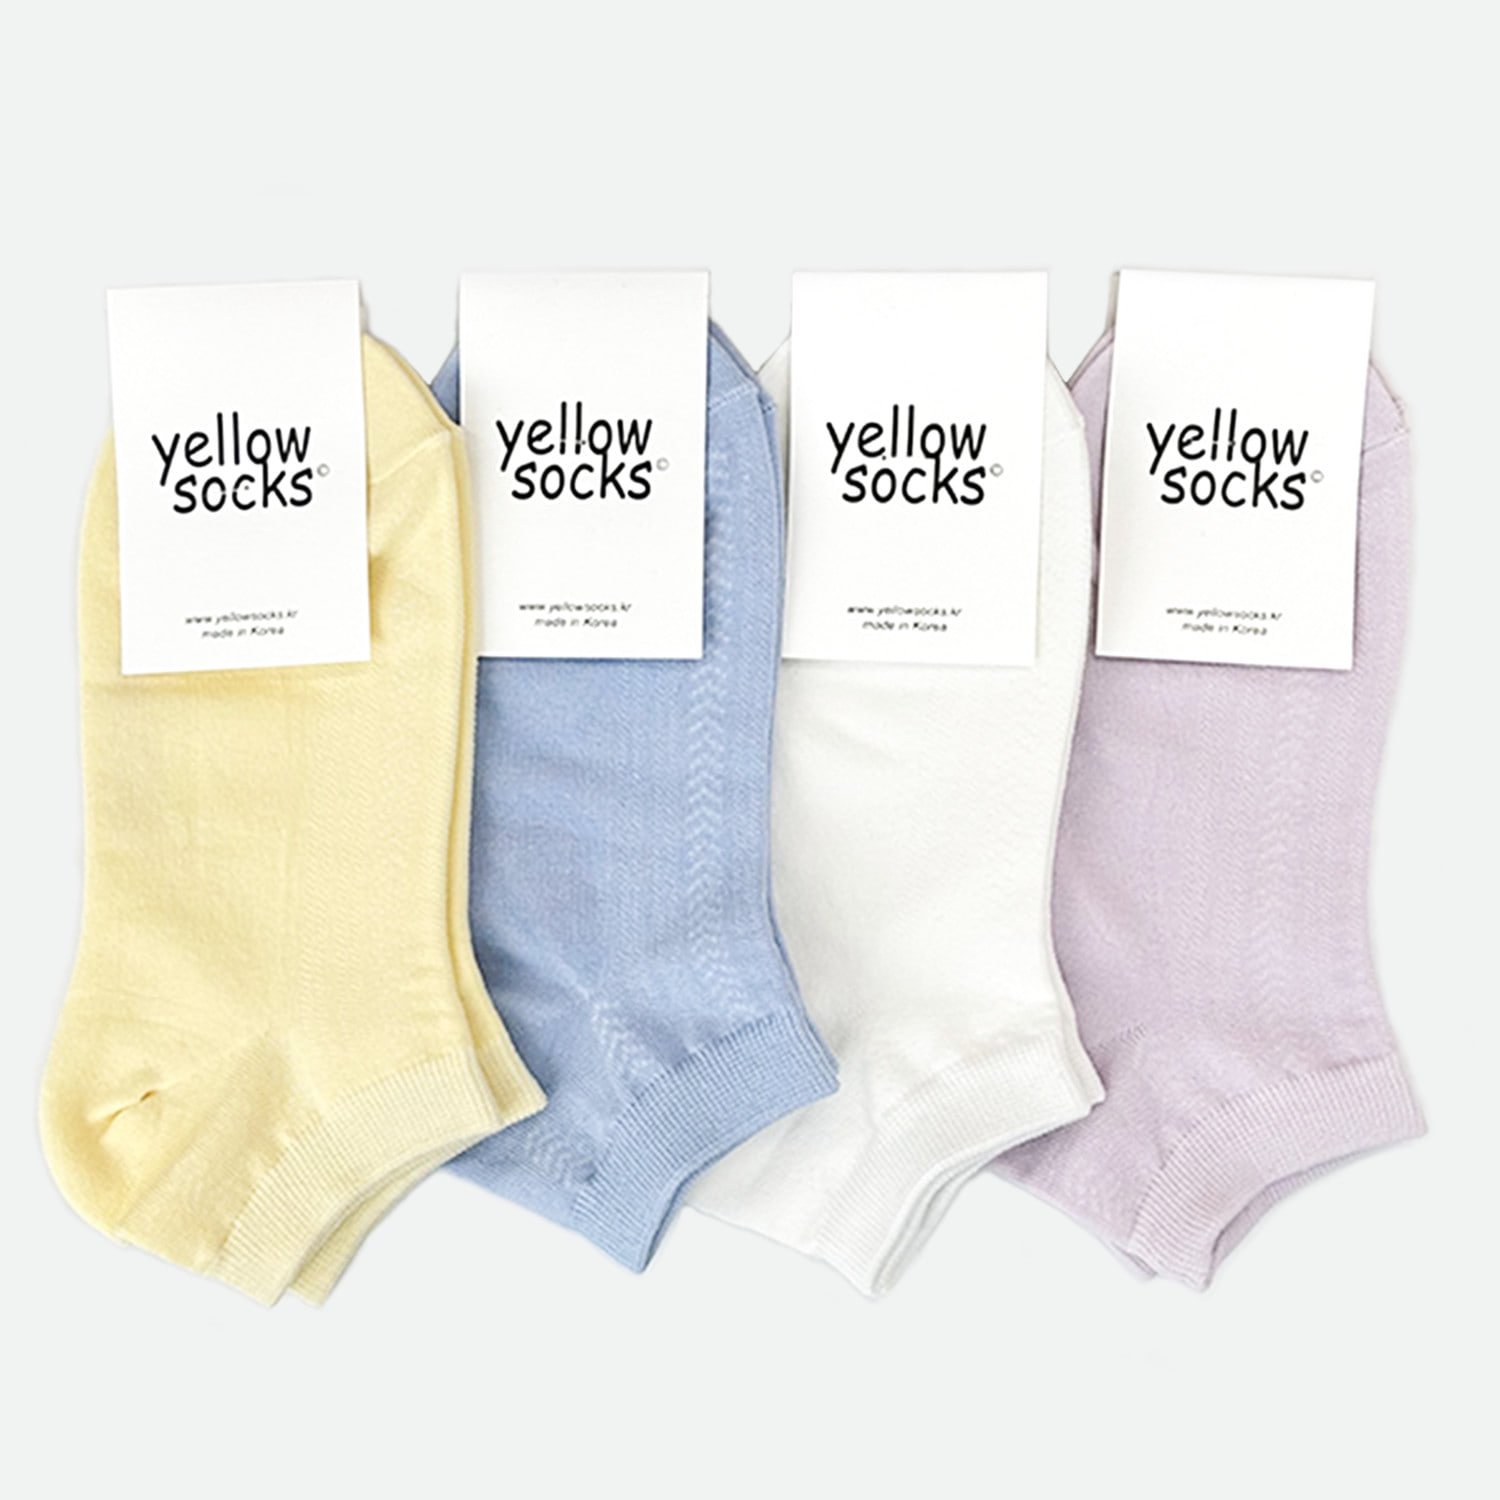 ANKLE SOCKS PUNCHING 4 COLOR SET 앵클삭스 펀칭 4컬러 세트